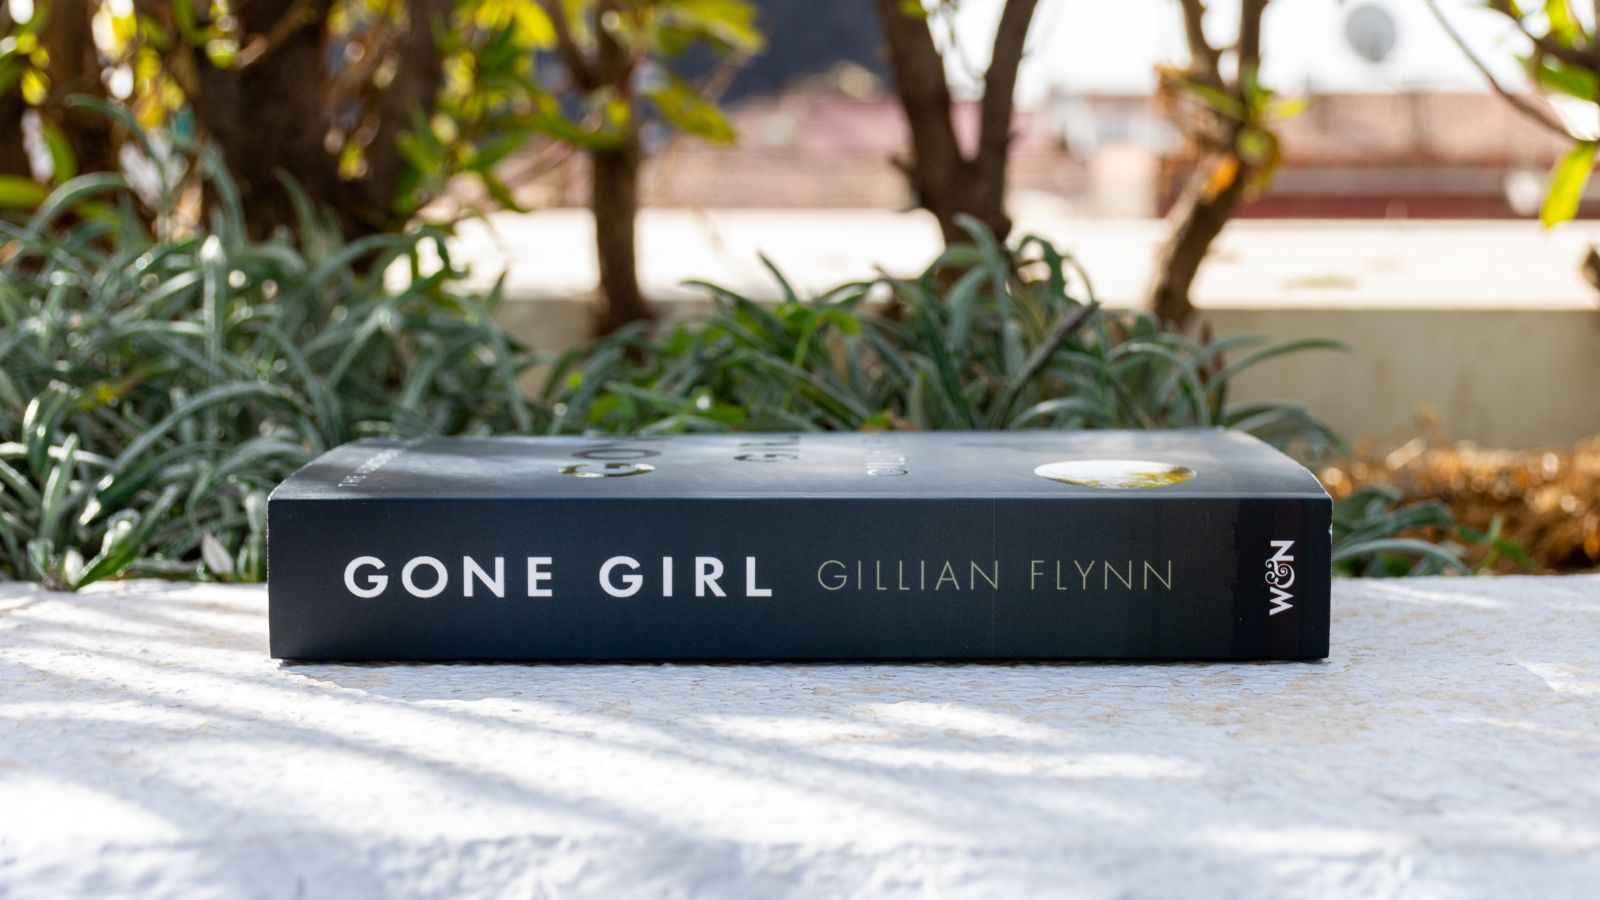 <p>As far as thrillers go, Gone Girl is highly regarded as one of the best. Gillian Flynn creates compelling characters that beg to be analyzed, exploring both male and female perspectives within themes of sexual politics, morality, and power. It relies on its excellent suspense, which proves that it's still possible to write something original in the twenty-first century.</p>